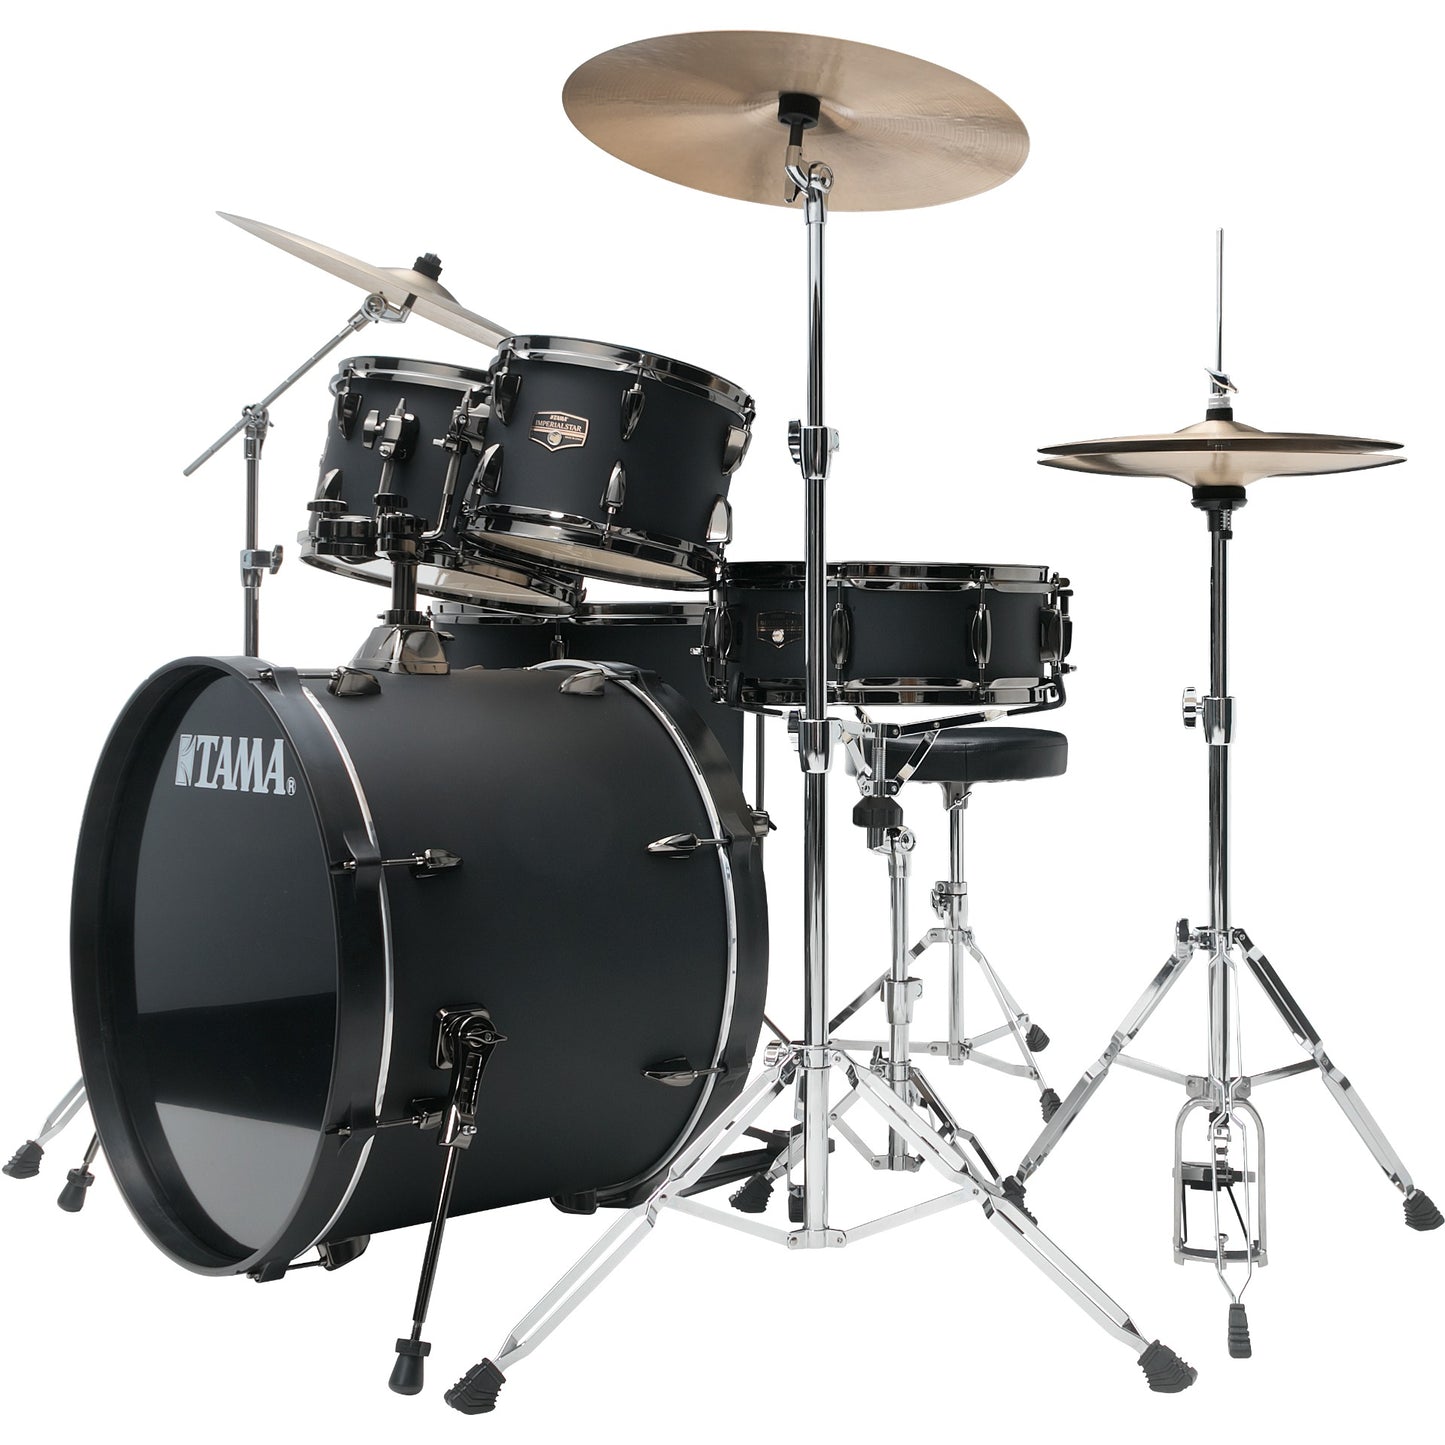 Tama Imperialstar 5-Piece Complete Drum Set - Blacked Out Black